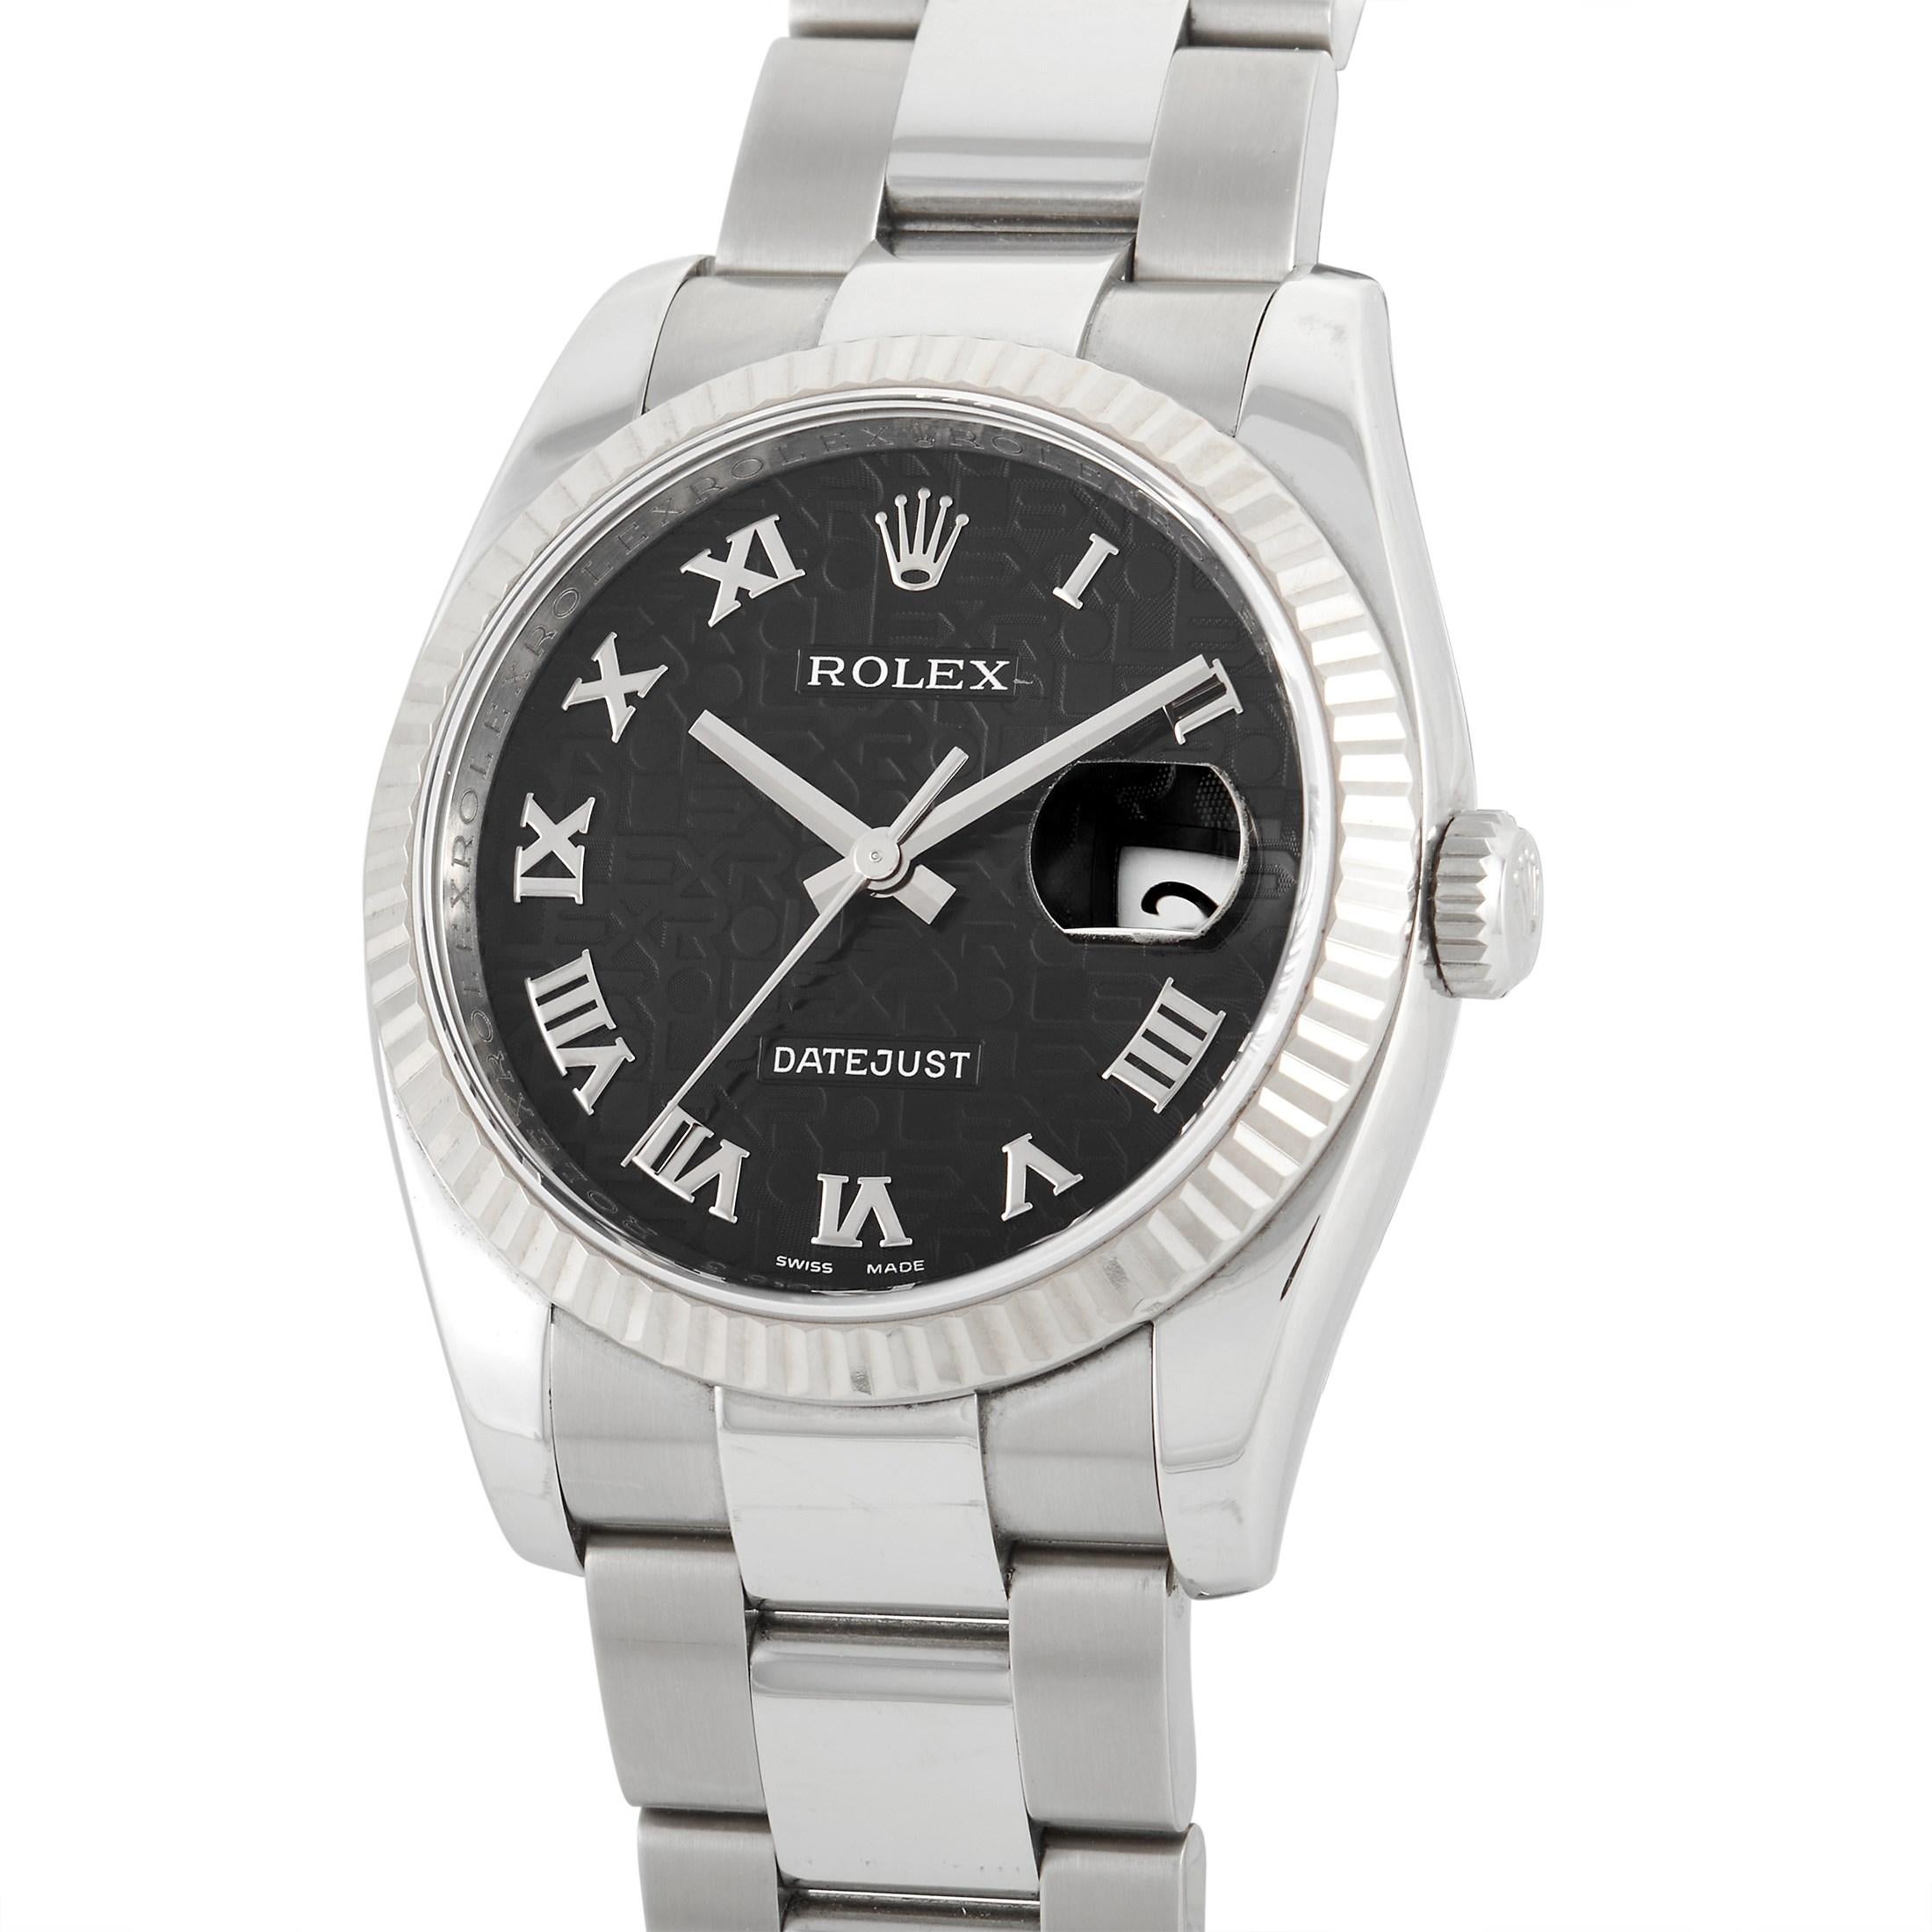 The Rolex Datejust Watch, reference number 116234, is an understated piece that still manages to exude the brand’s inherent sense of luxury. 

This impressive timepiece features a 36mm round case, bracelet, and fluted bezel made from shimmering